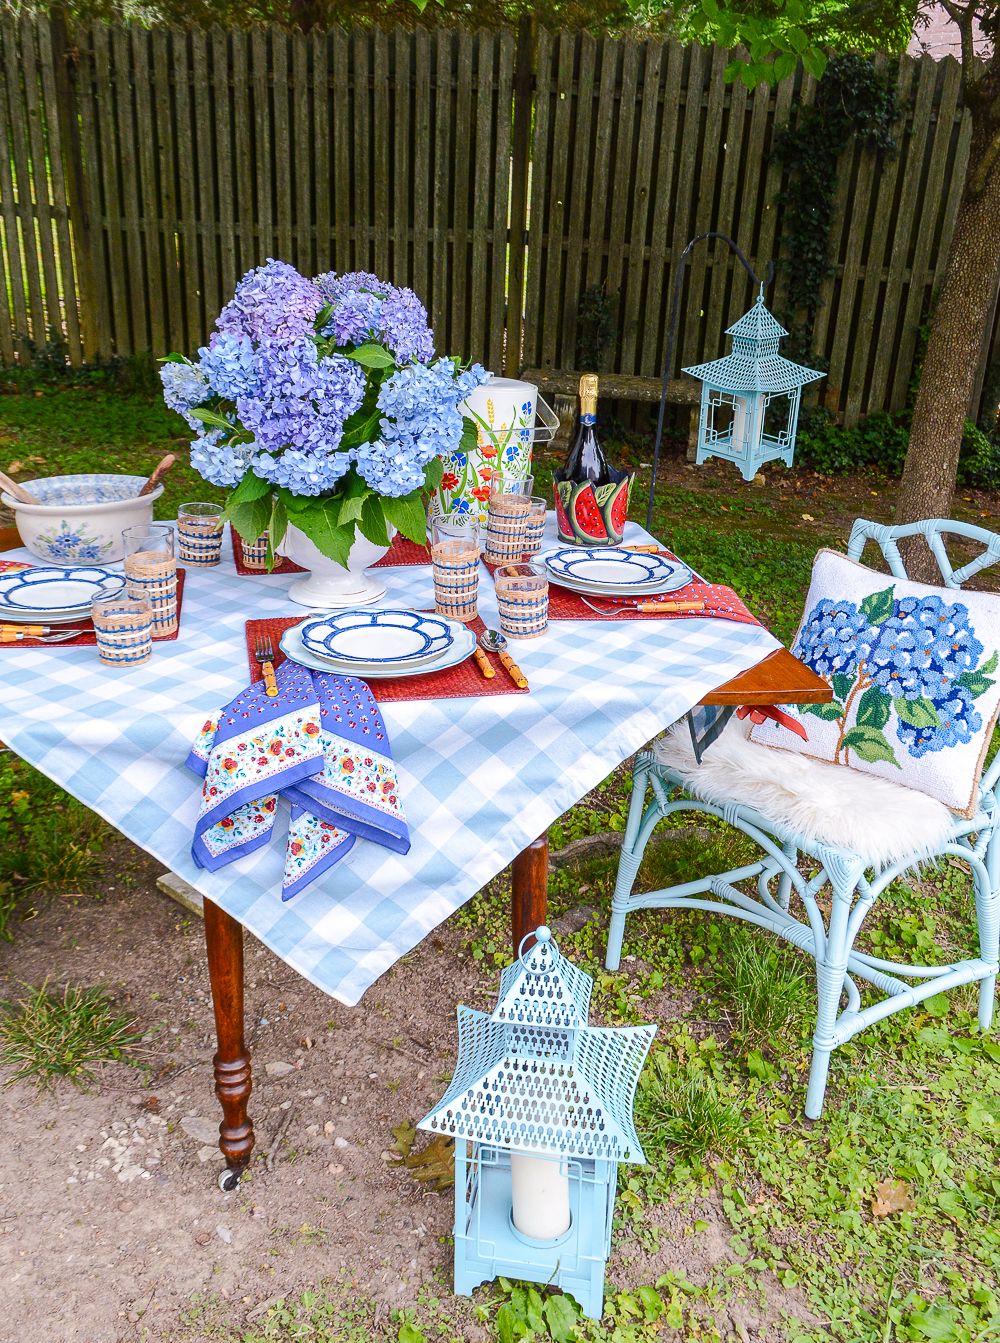 Summer al fresco in the garden dinner inspiration in blue and white with pops of red for a festive feel perfect for July parties